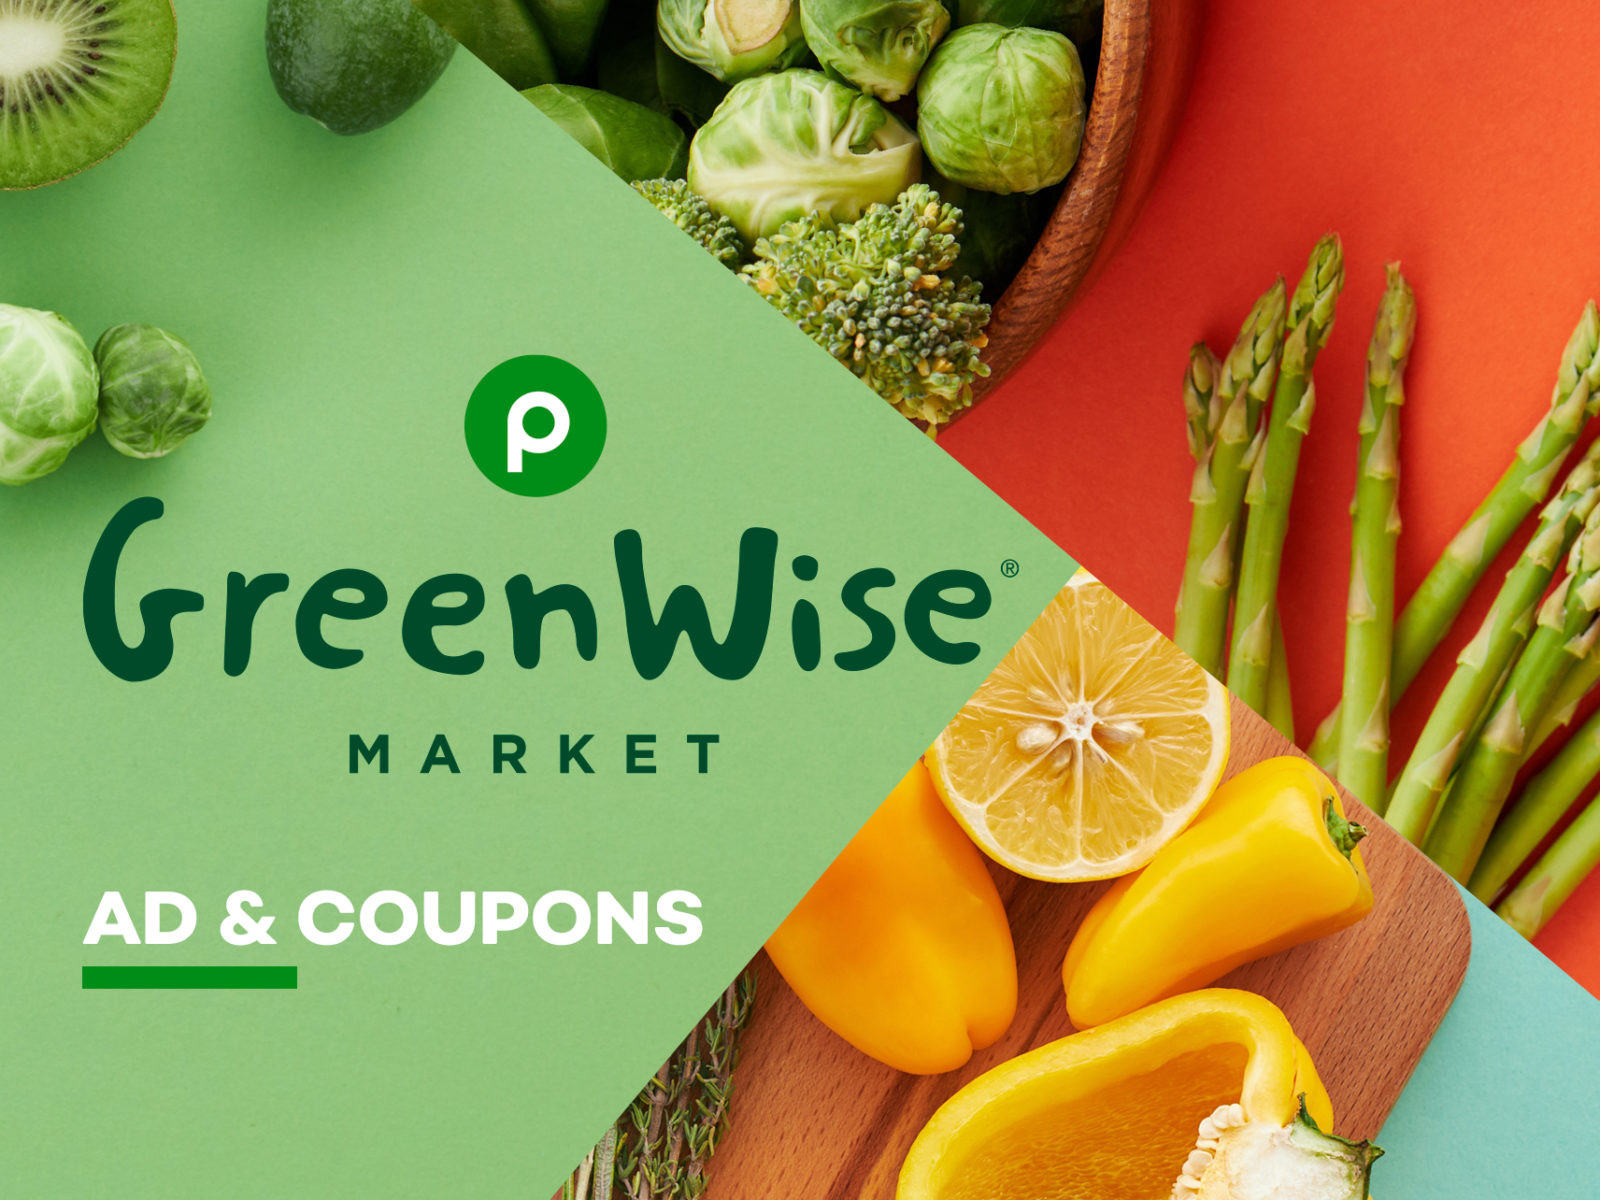 Publix GreenWise Market Ad & Coupons Week Of 10/12 to 10/18 (10/11 to 10/17 For Some)